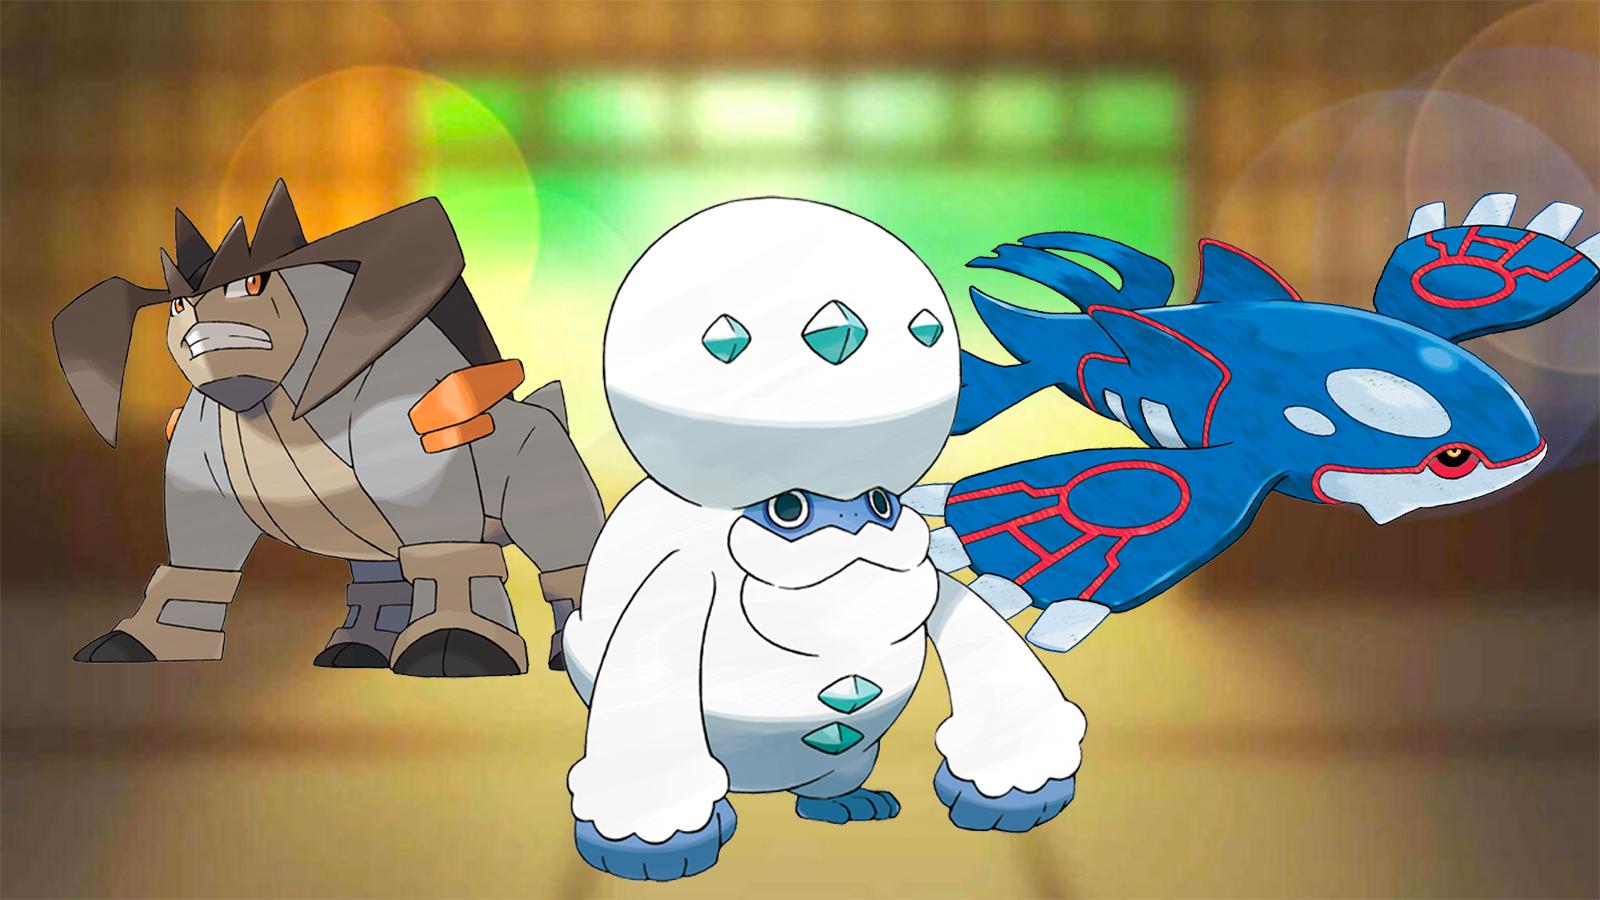 Galarian Darmanitan, Terrakion, and Kyogre appearing in the best team to beat Giovanni in Pokemon Go